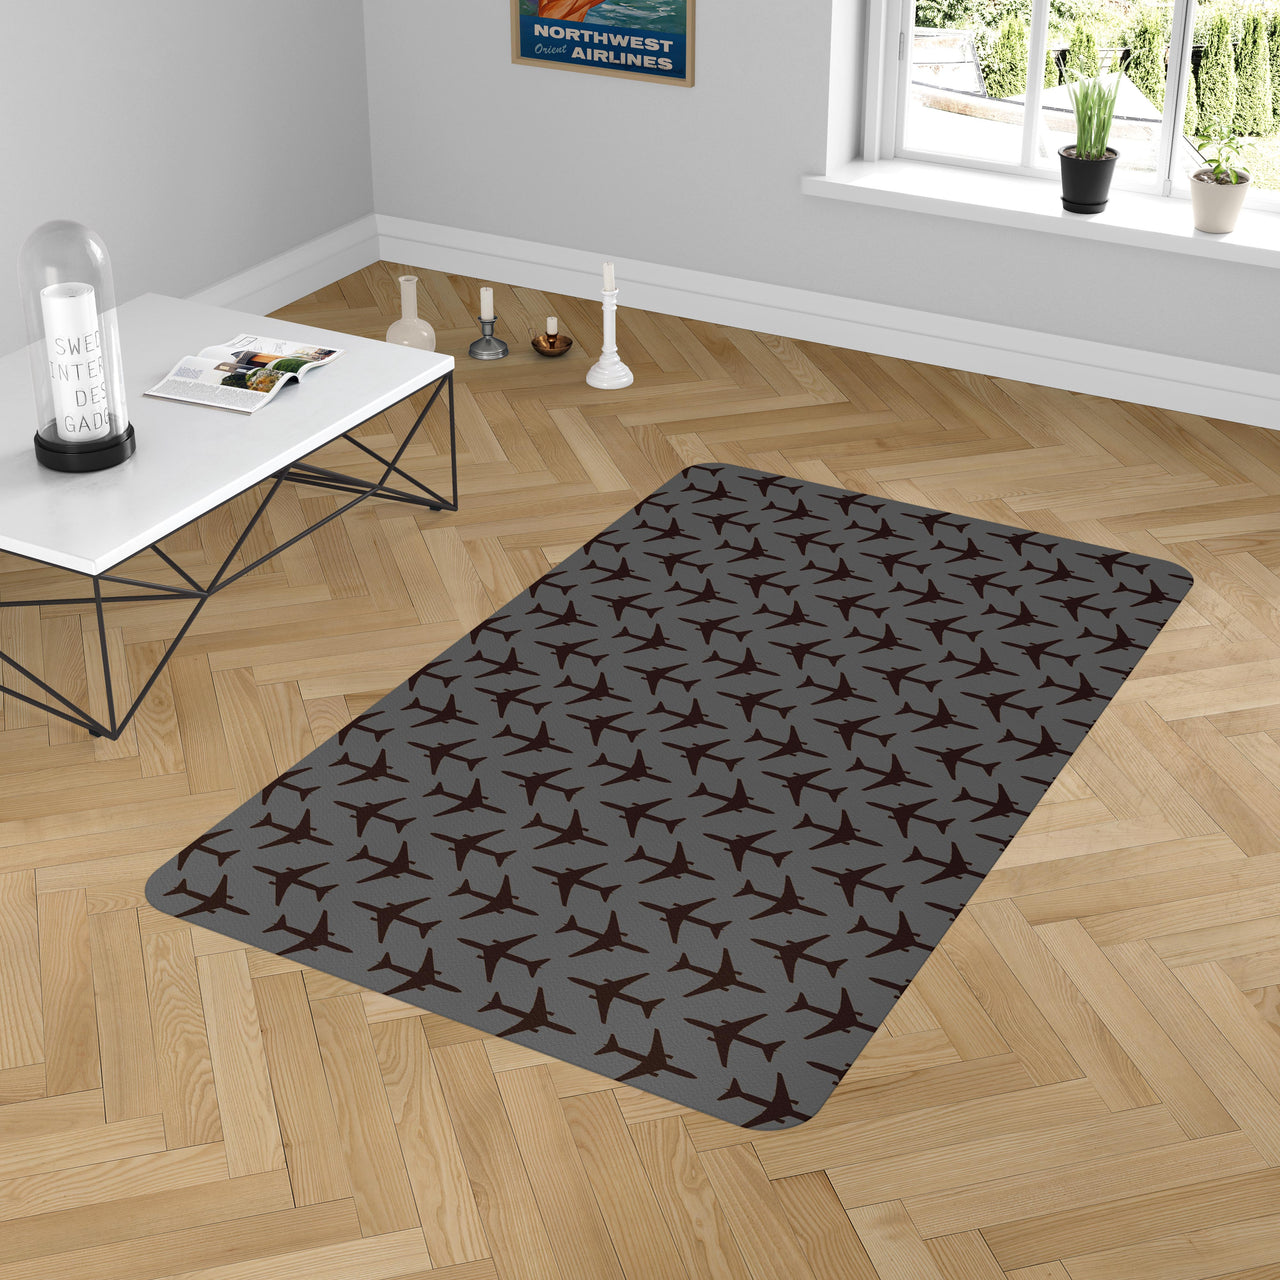 Perfectly Sized Seamless Airplanes (Gray) Designed Carpet & Floor Mats